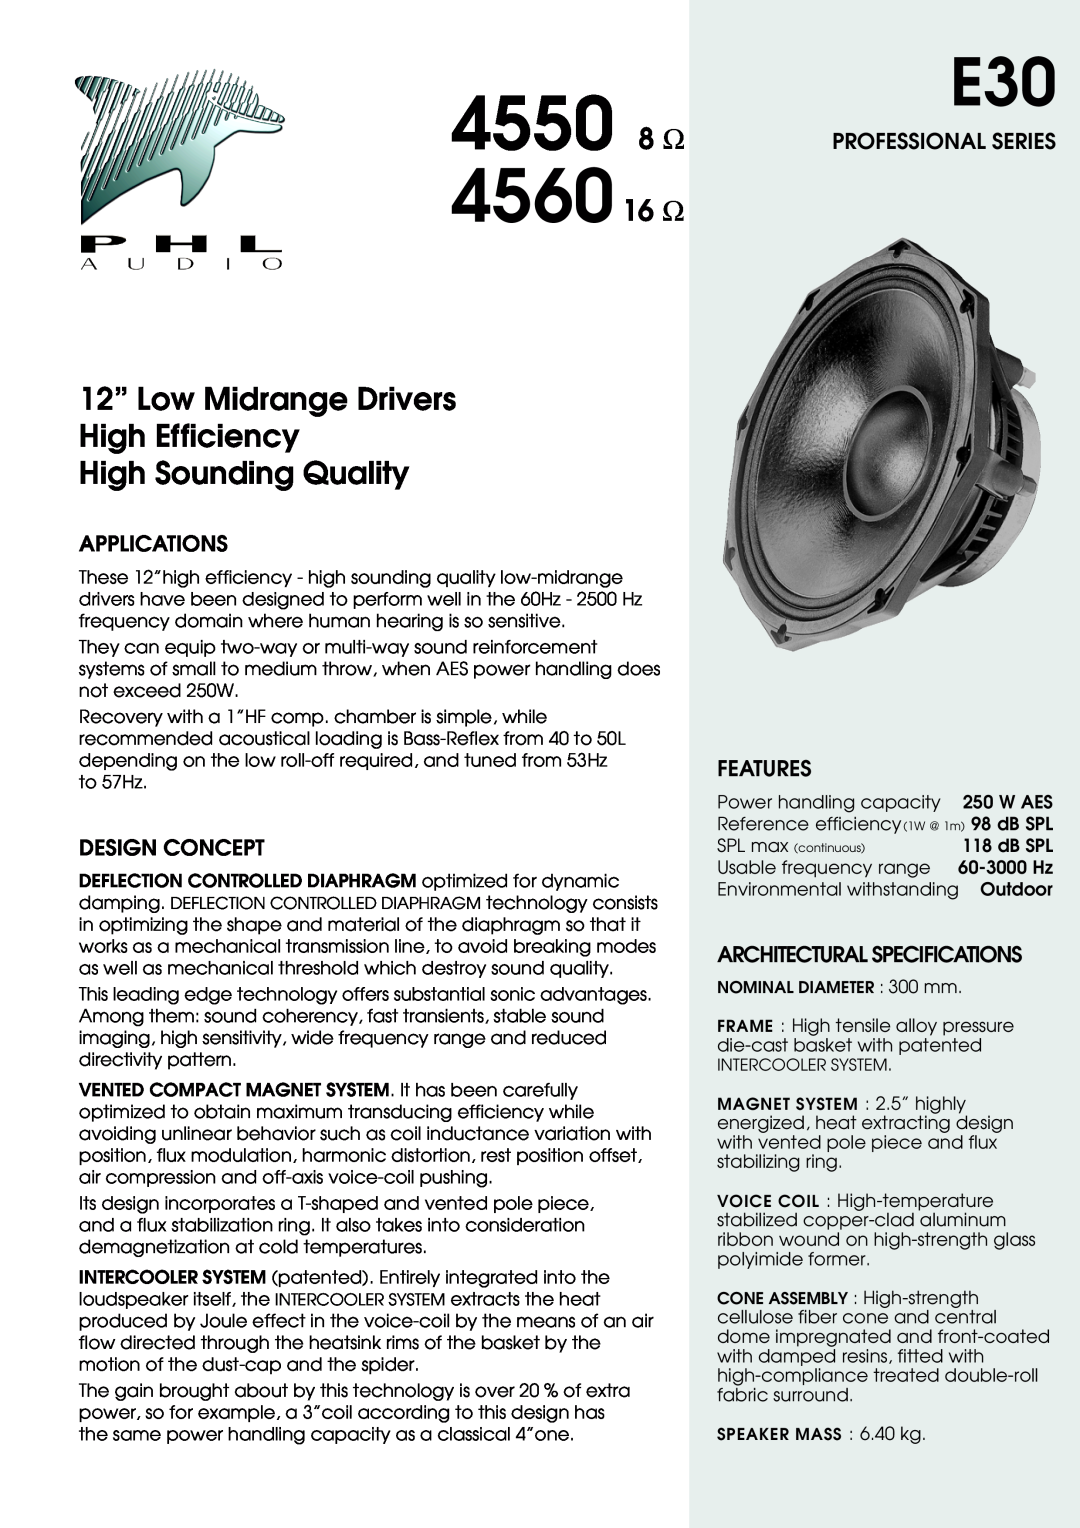 PHL Audio specifications Applications, Design Concept, Features, Architectural Specifications, 4550 8 Ω, 456016 Ω 